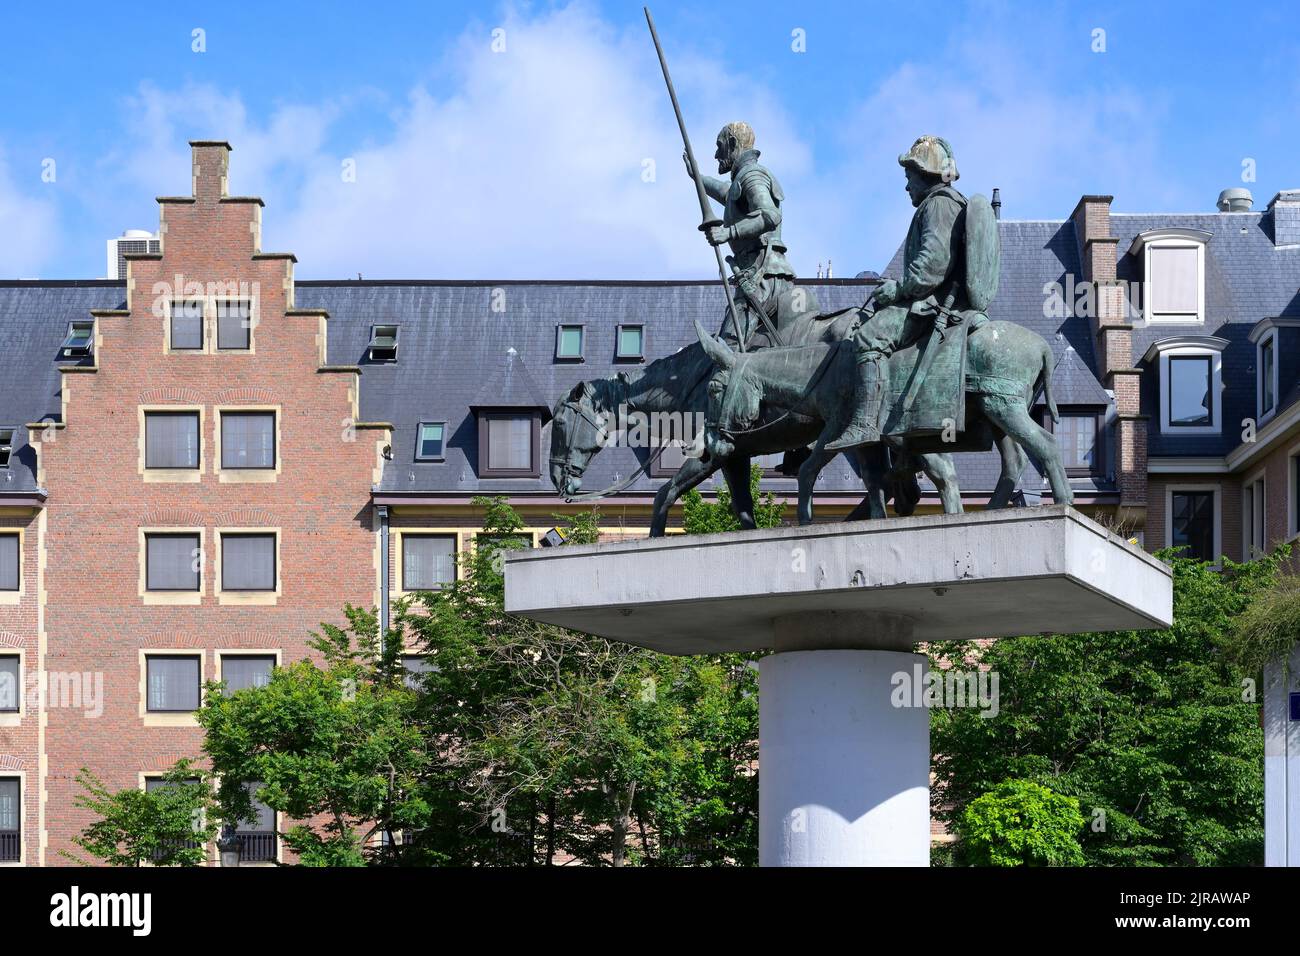 Spanish square with the statue of Don Quichotte and Sancho Panza, Brussels, Brabant, Belgium Stock Photo